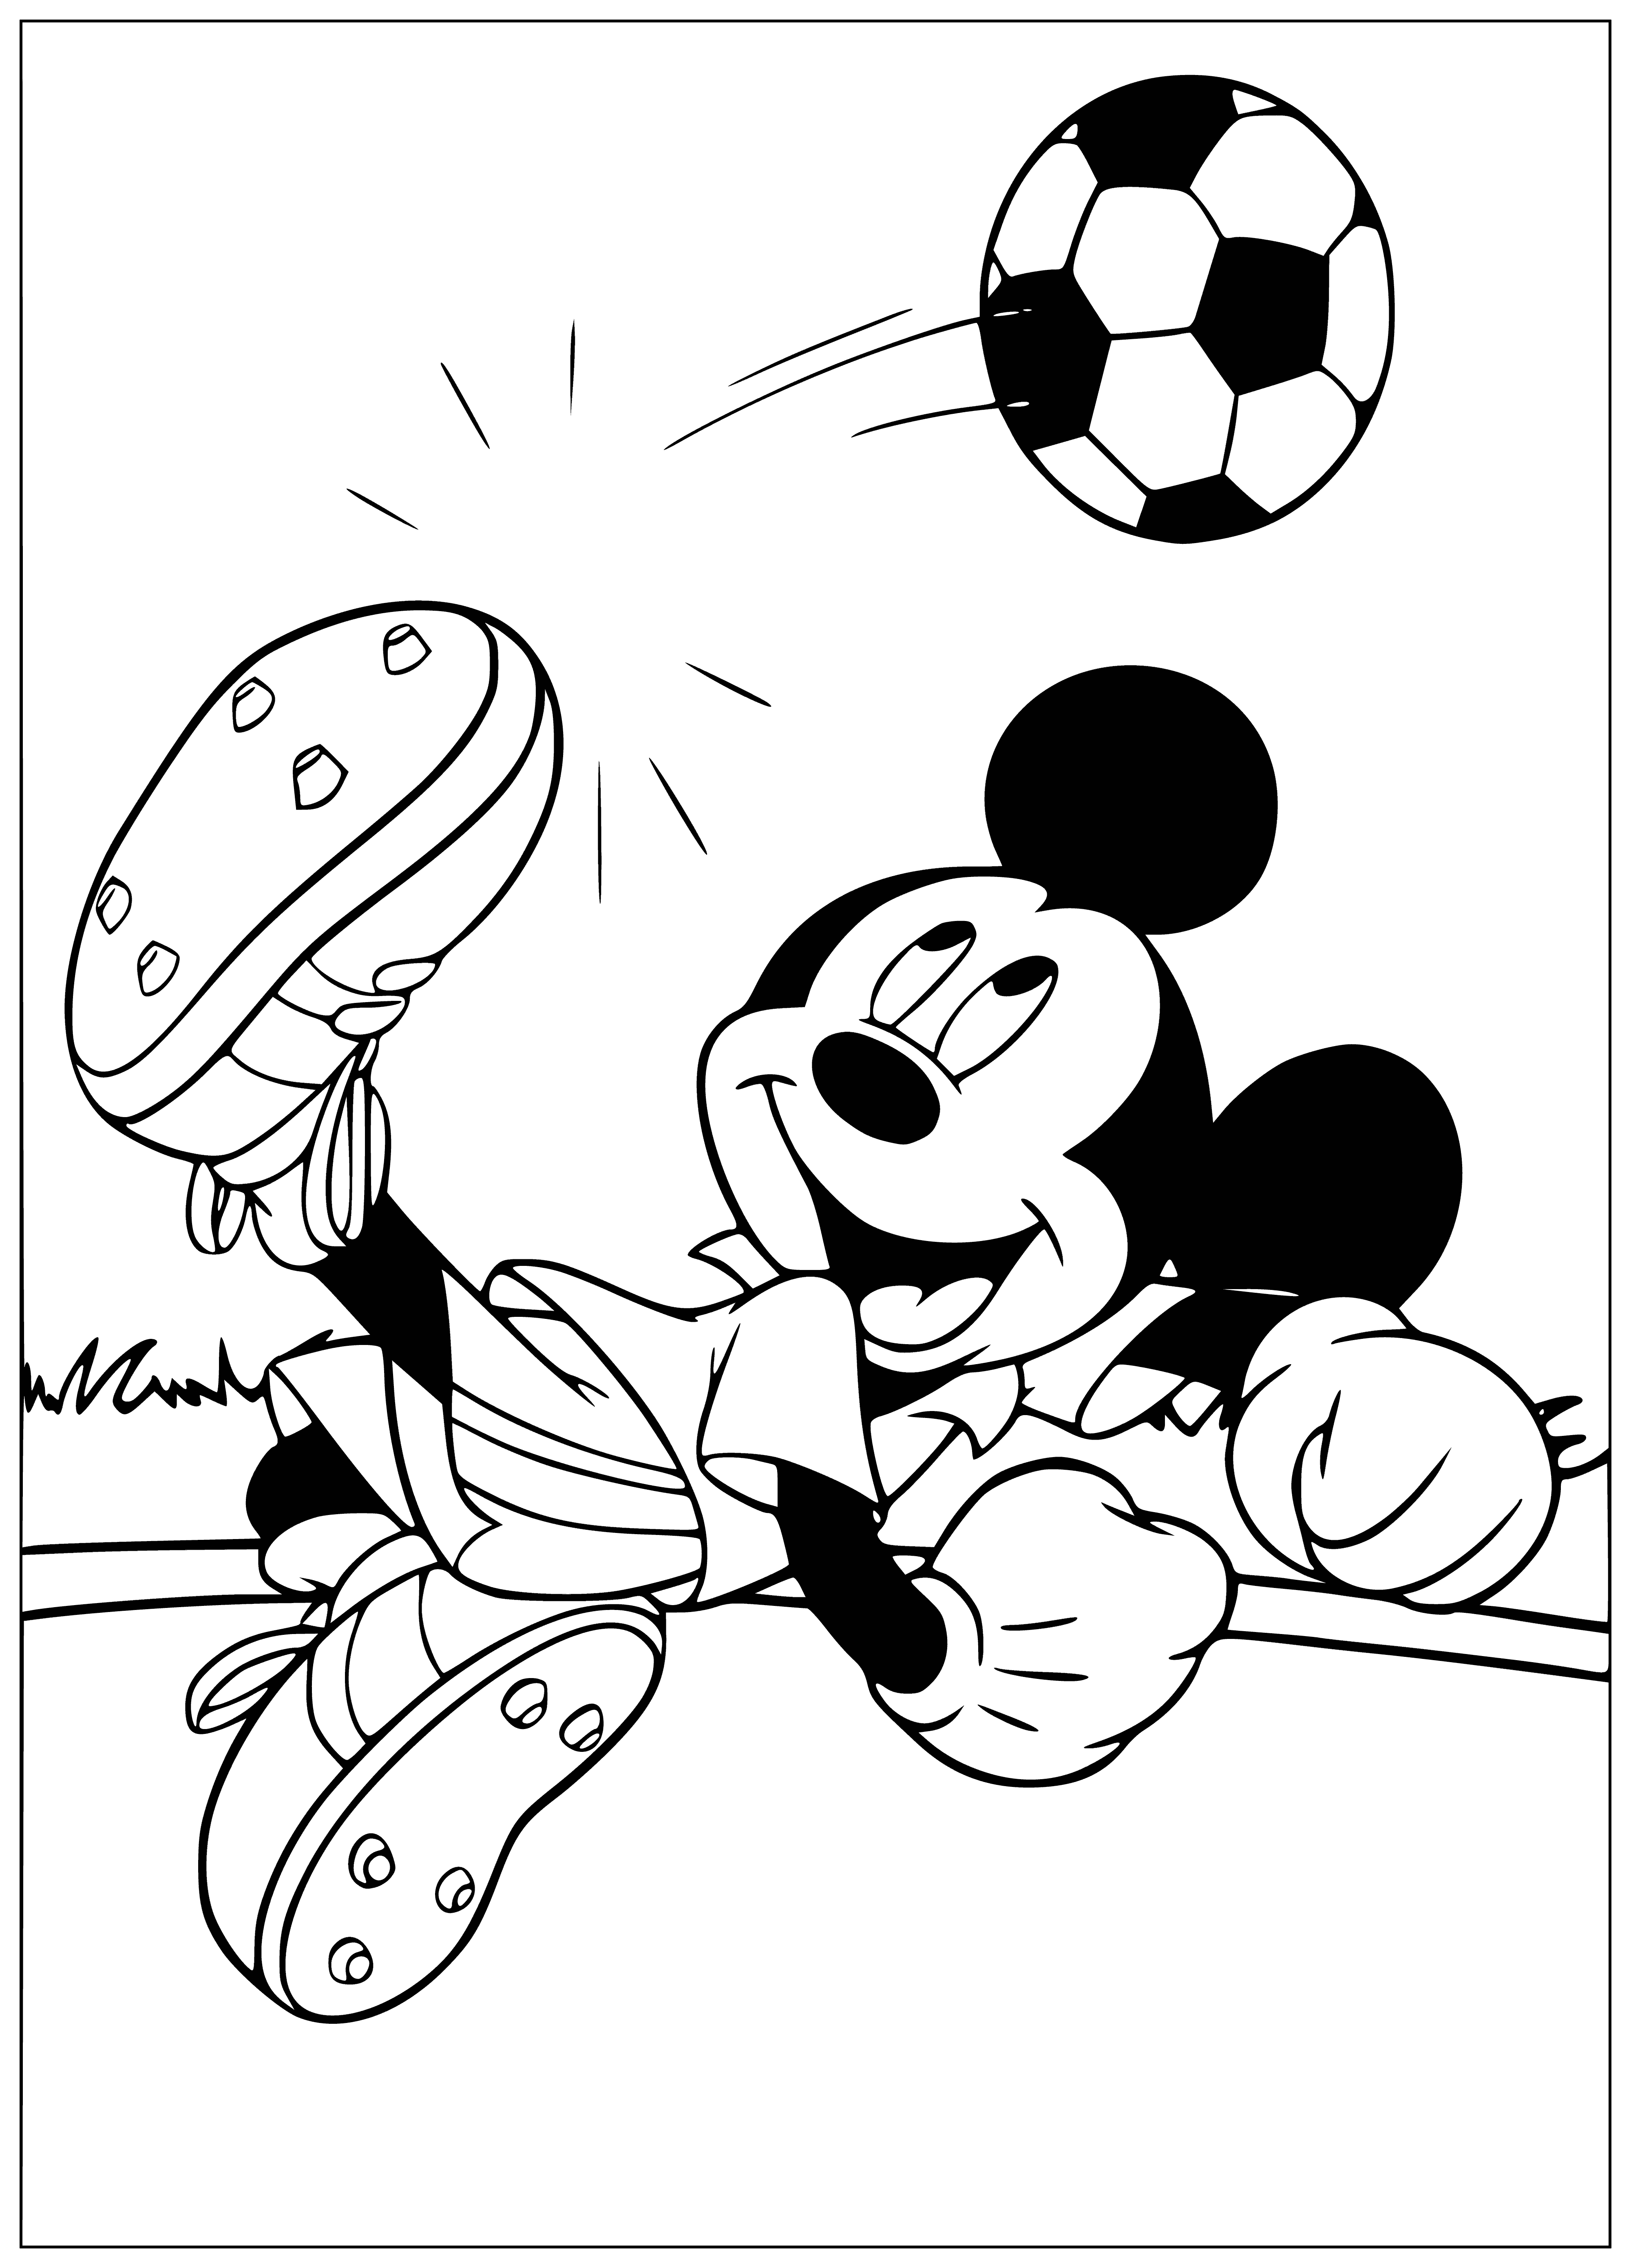 coloring page: A cartoon-ish brown, white and black football with stars and ears. A fun coloring page for kids. #coloring